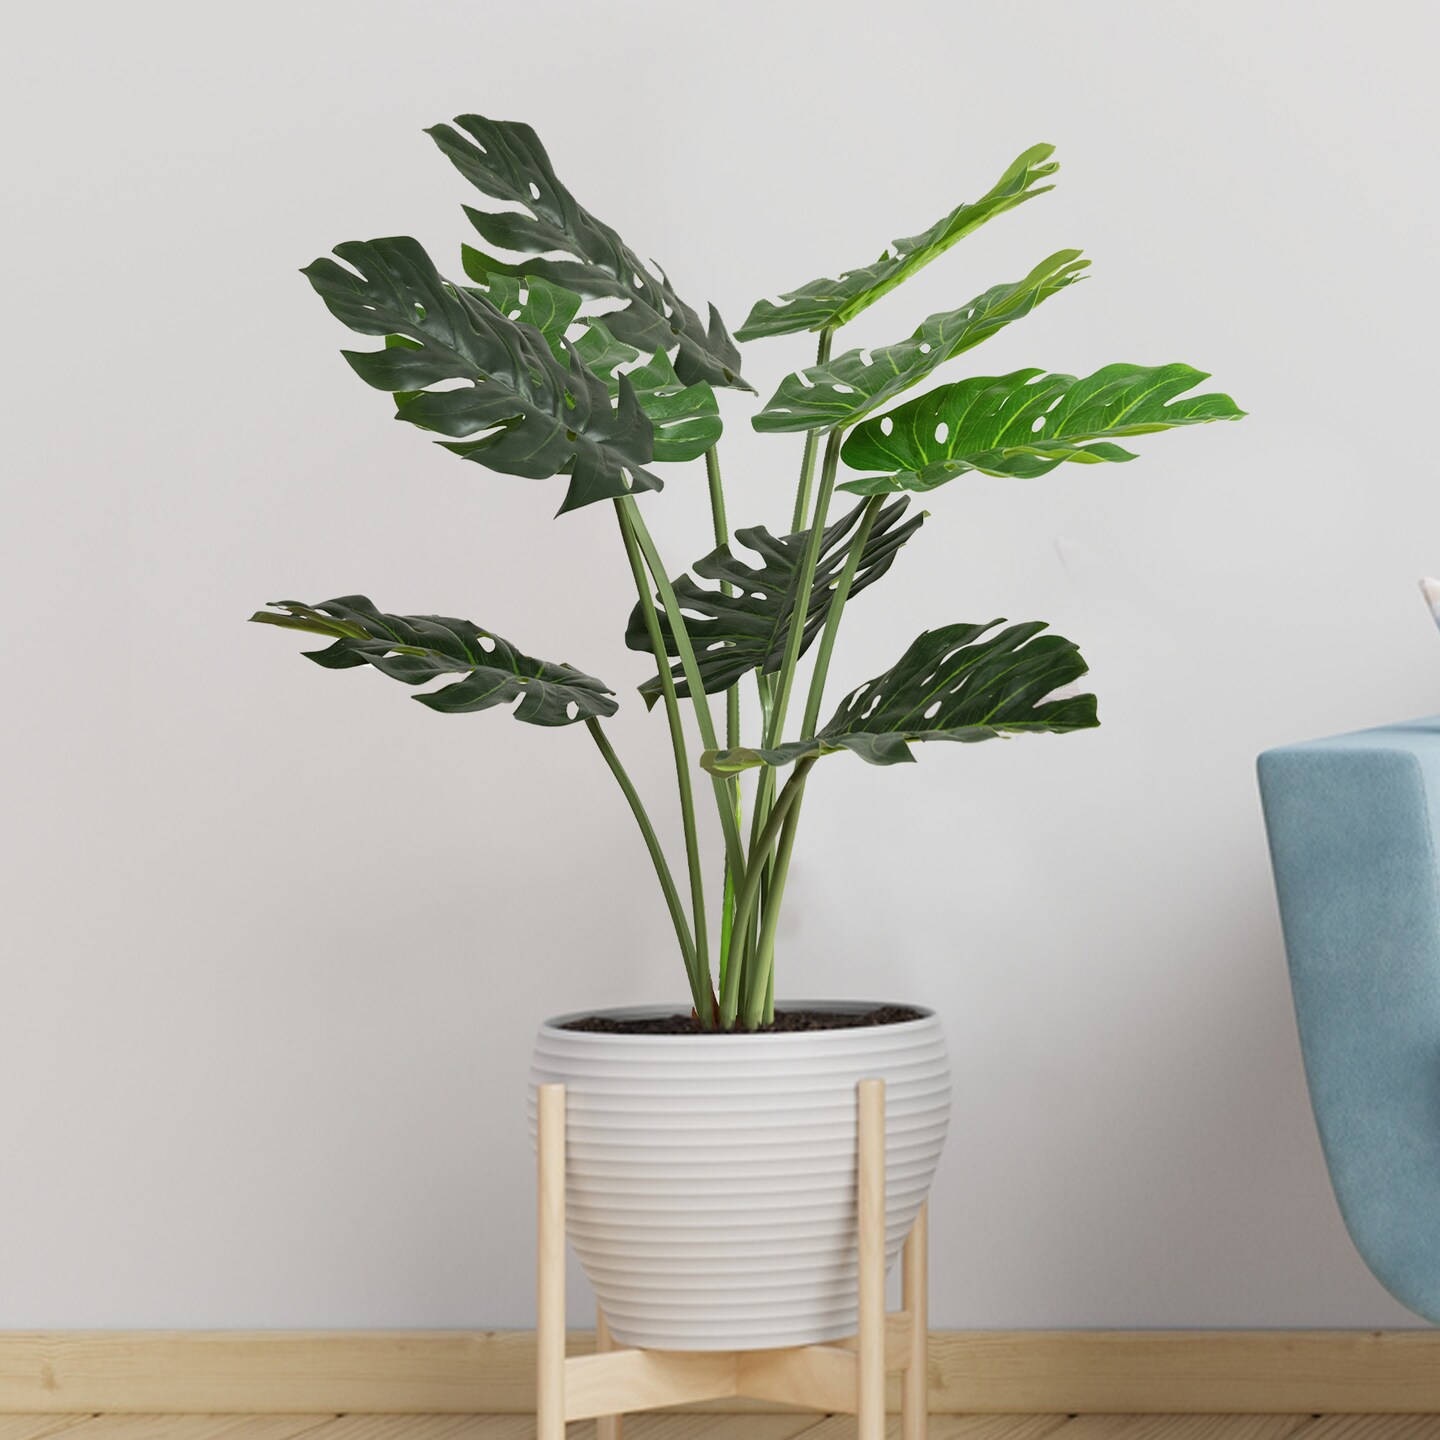 How Plants Can Elevate Your Home Decor: Tips and Ideas – Geoponics